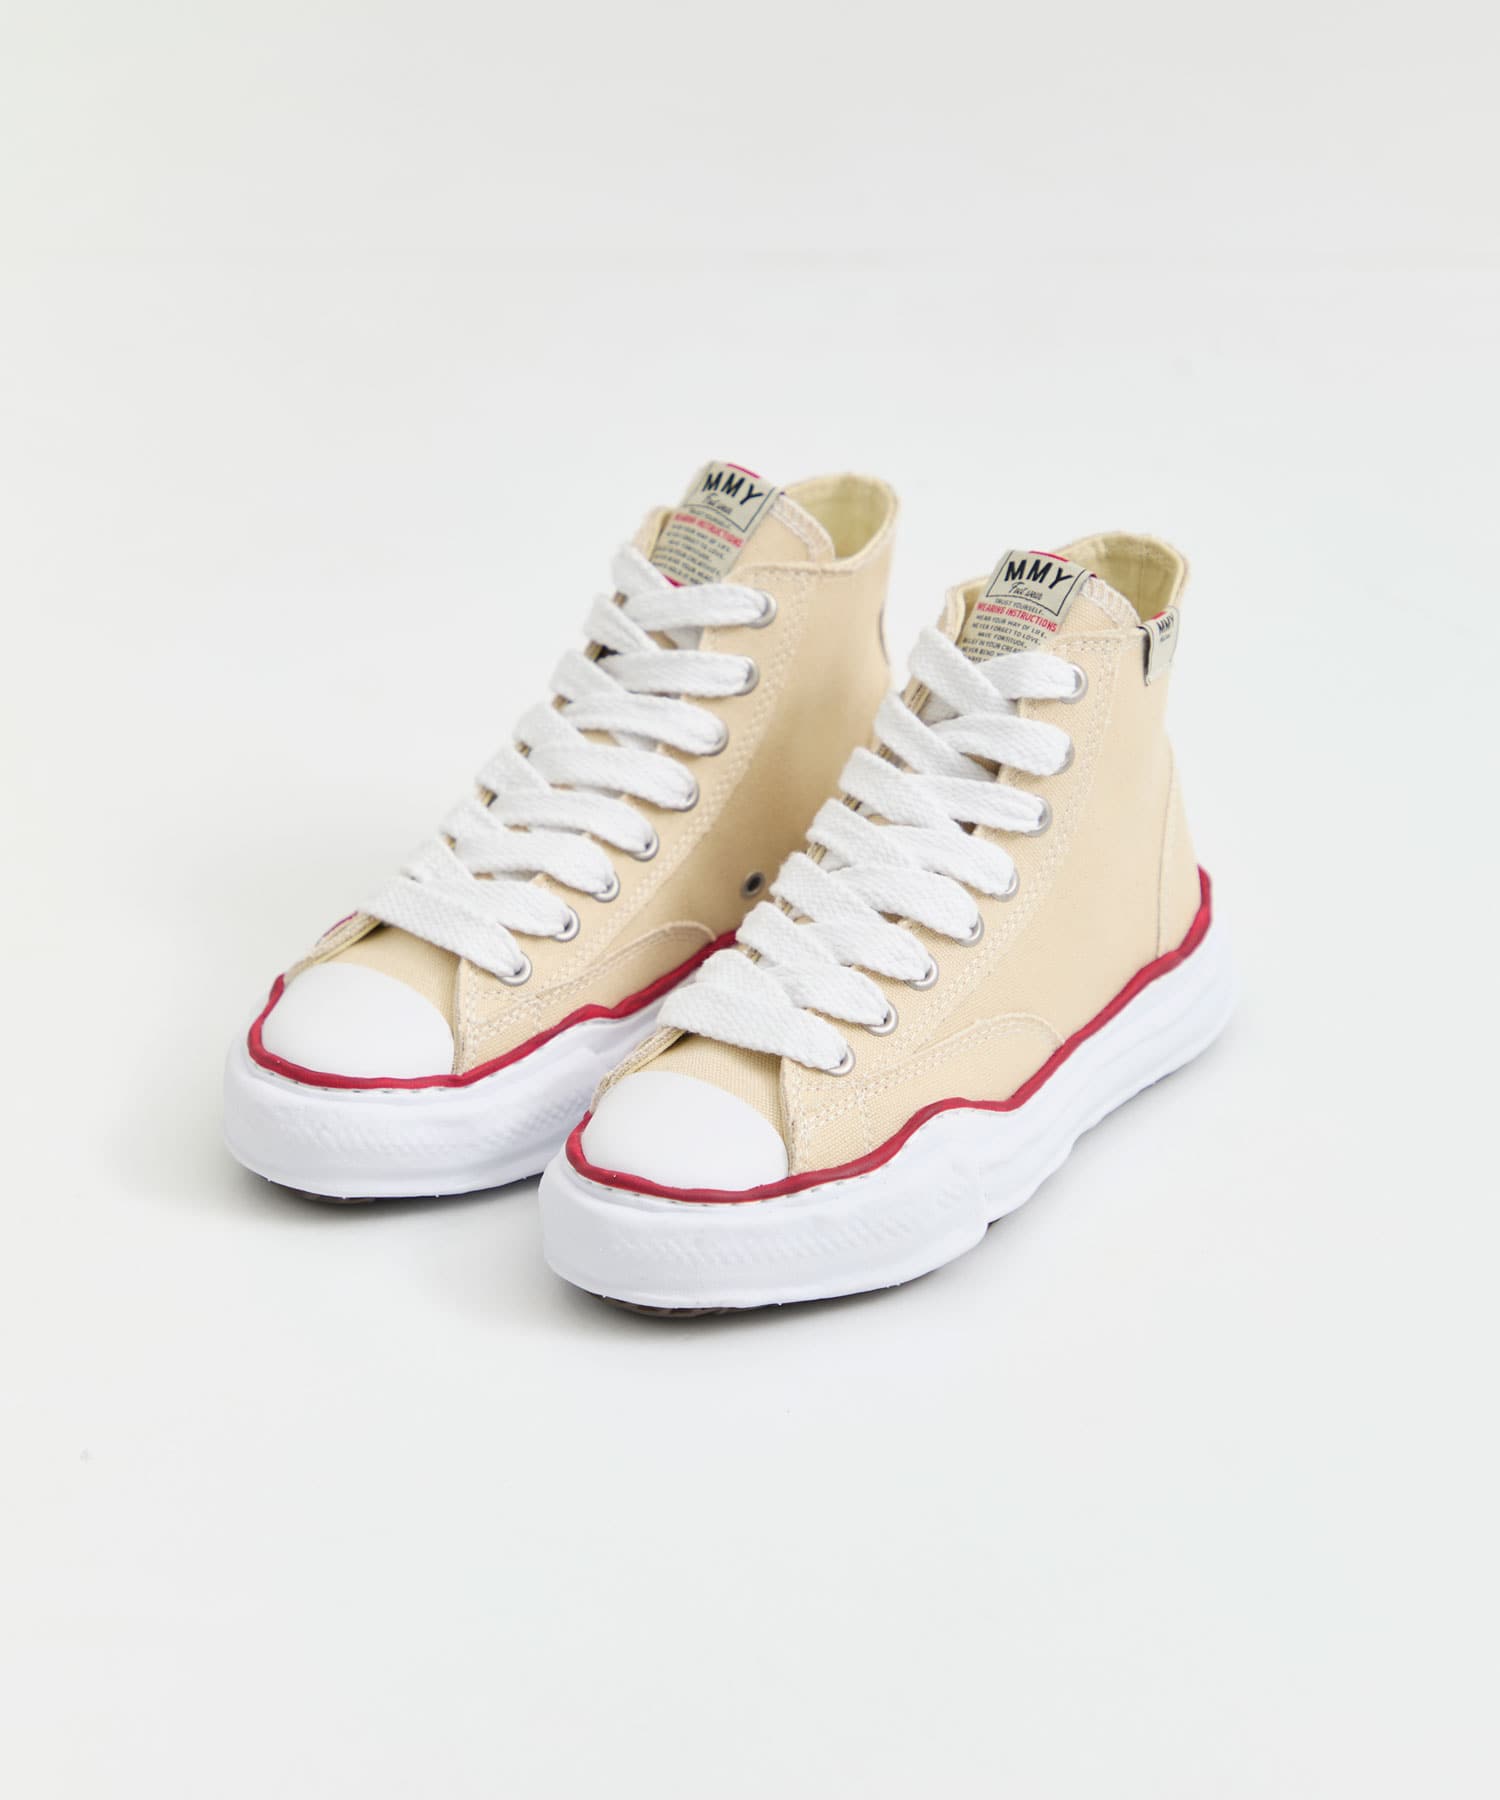 PETERSON high original sole canvas high-Top sneakers